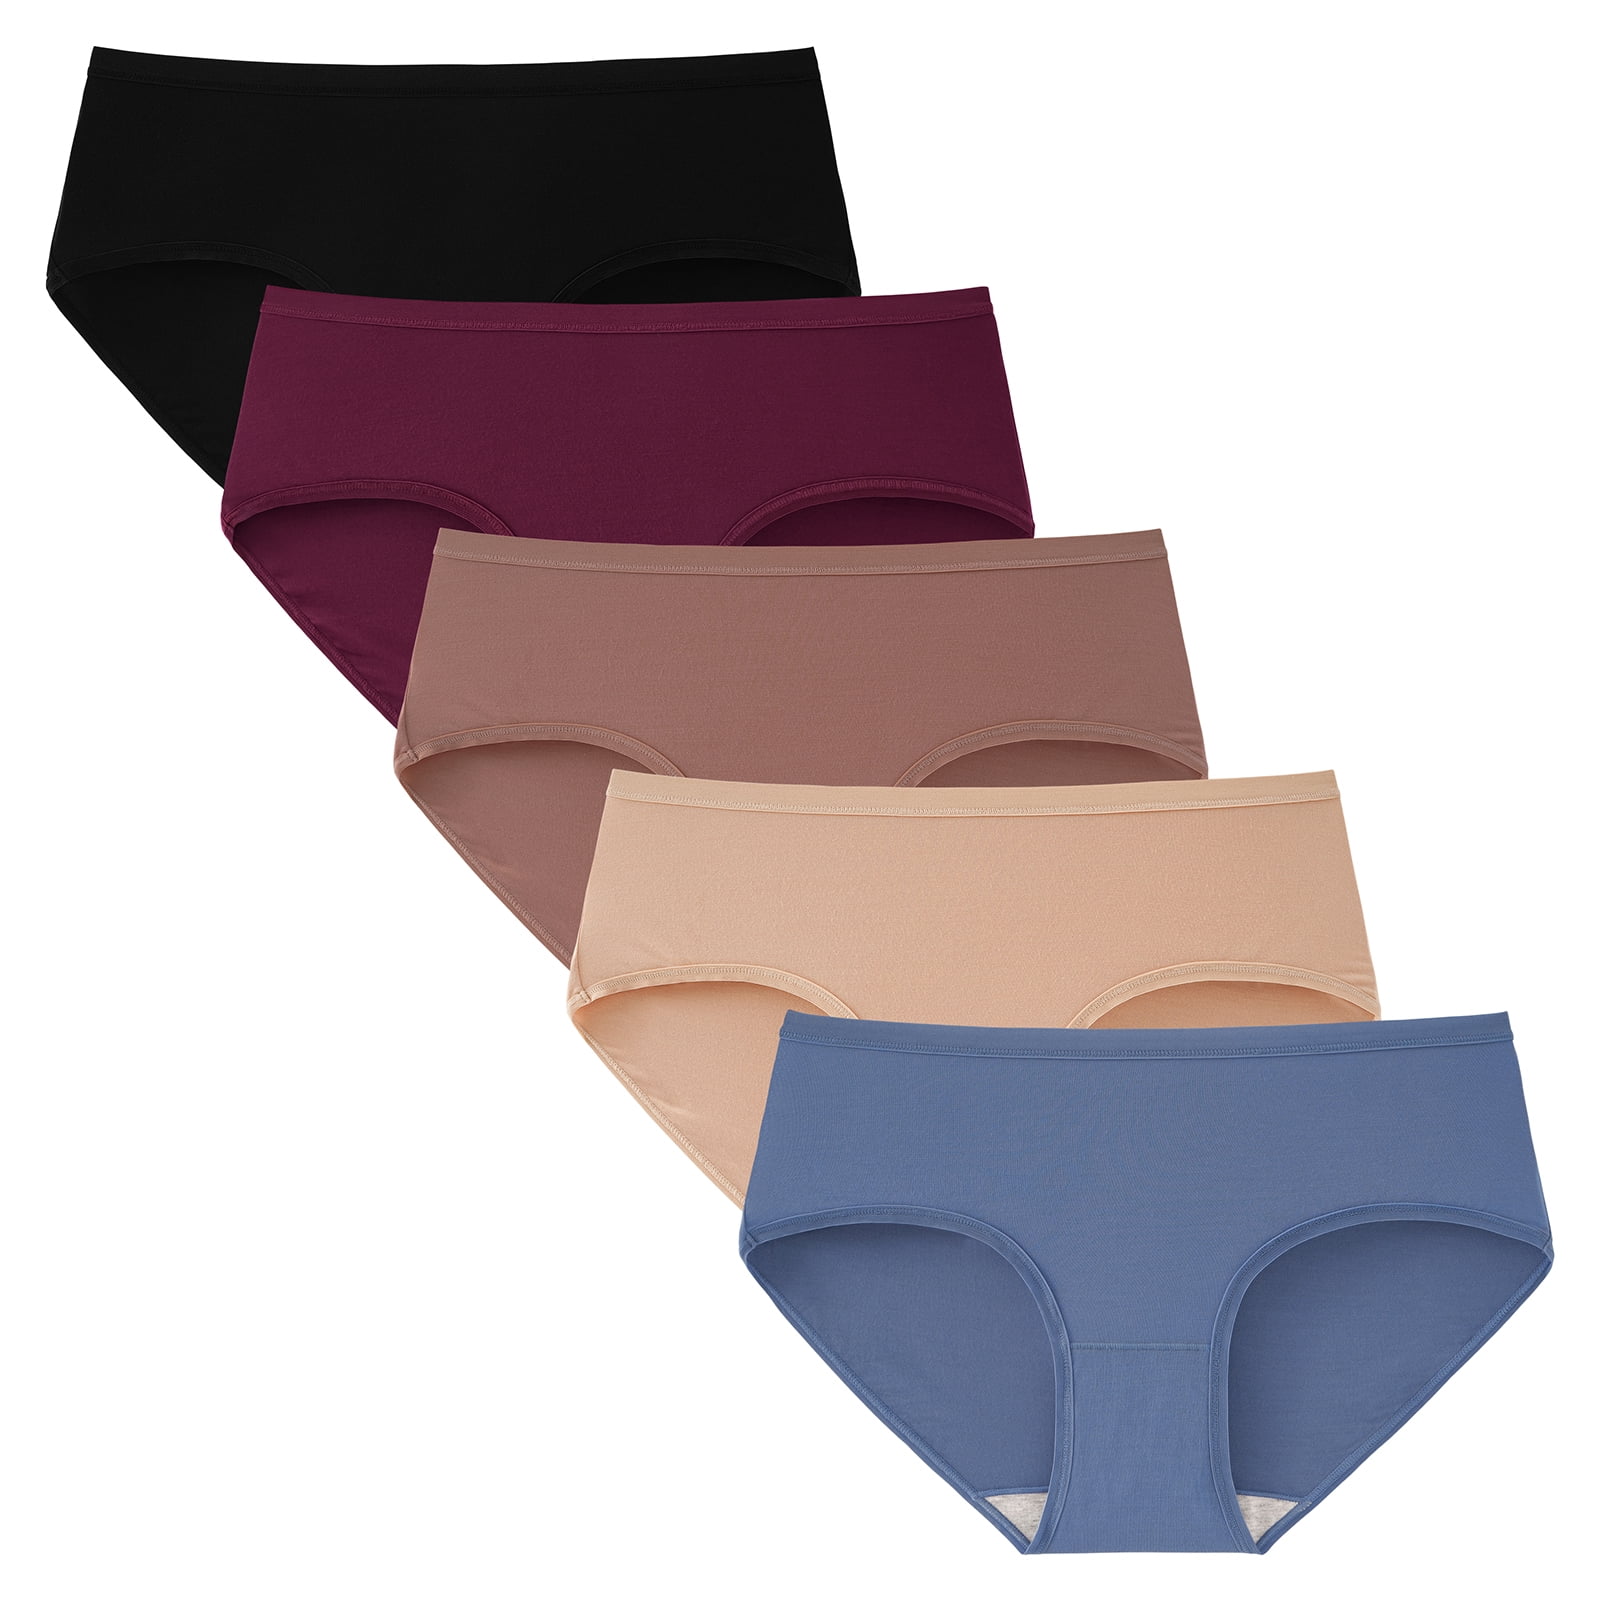 INNERSY Womens Underwear Micro Modal Soft Panties Pack of 5 (L,  Black/Burgundy/Coffee/Bleached Apricot/Gray Blue)